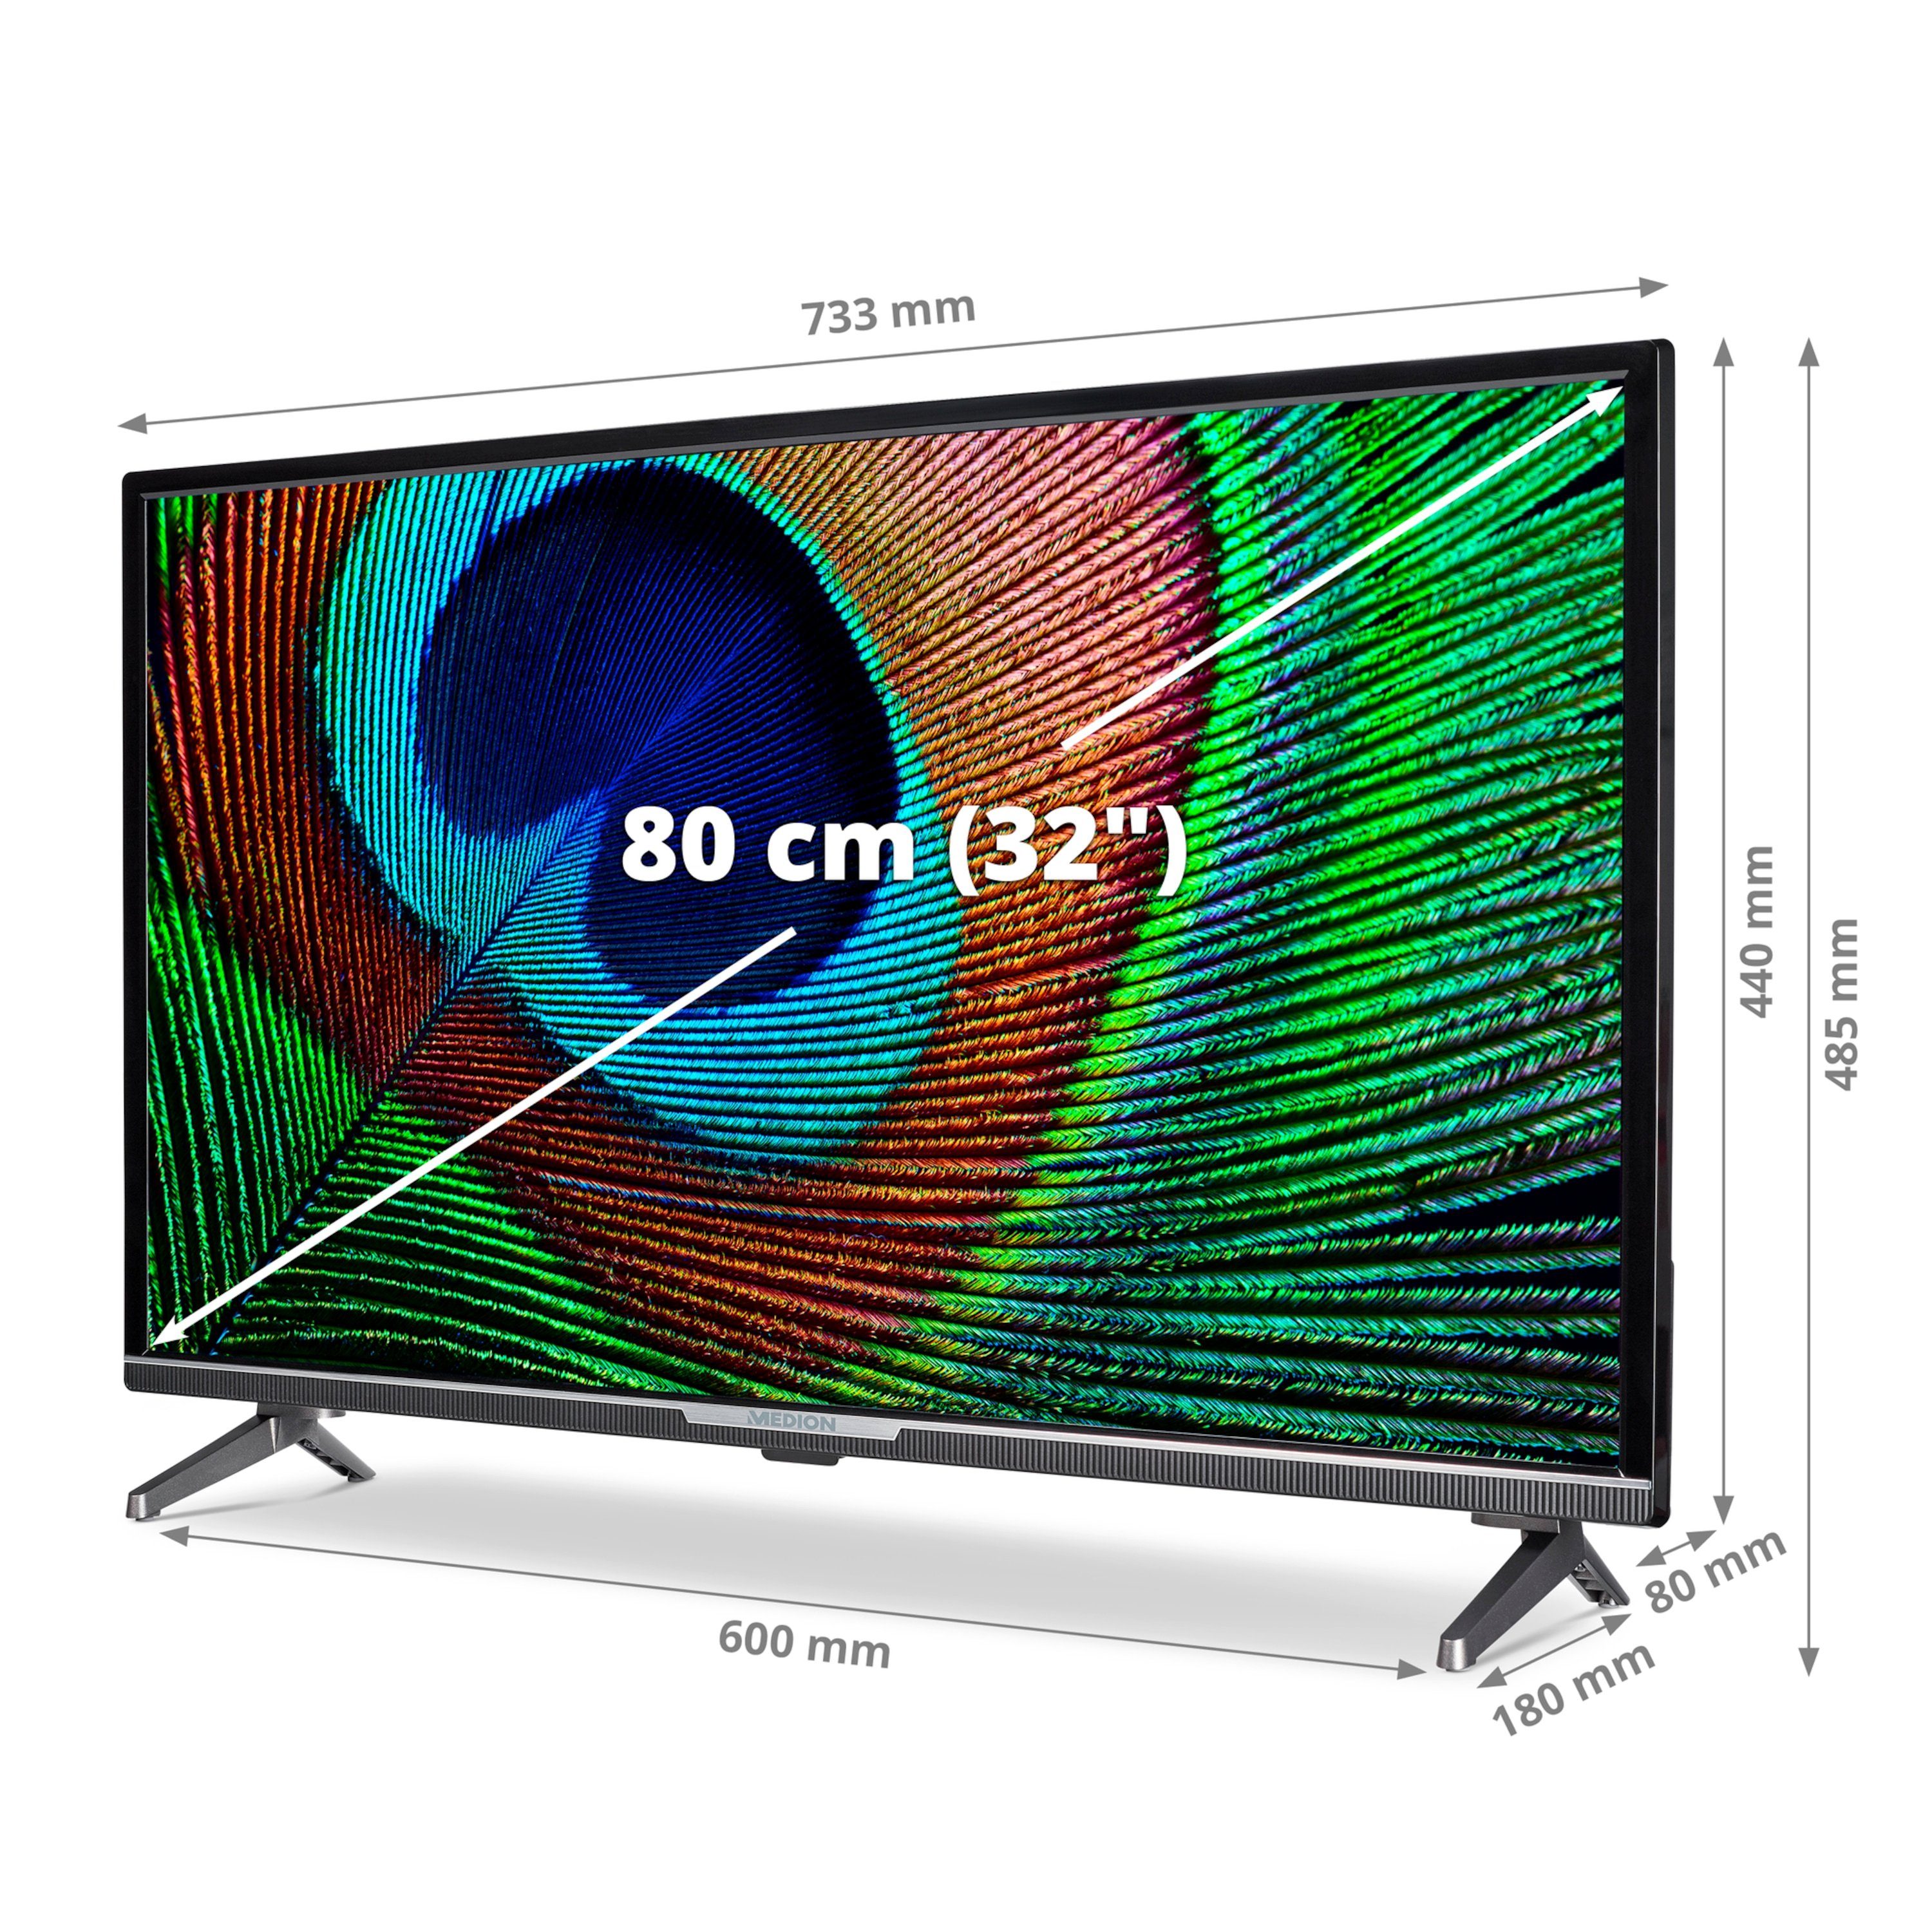 Medion® MD30042 LED-Fernseher (80 cm/31.5 TV, HD, Full 60Hz, MD30042) Display Zoll, Full-HD 1080p Android